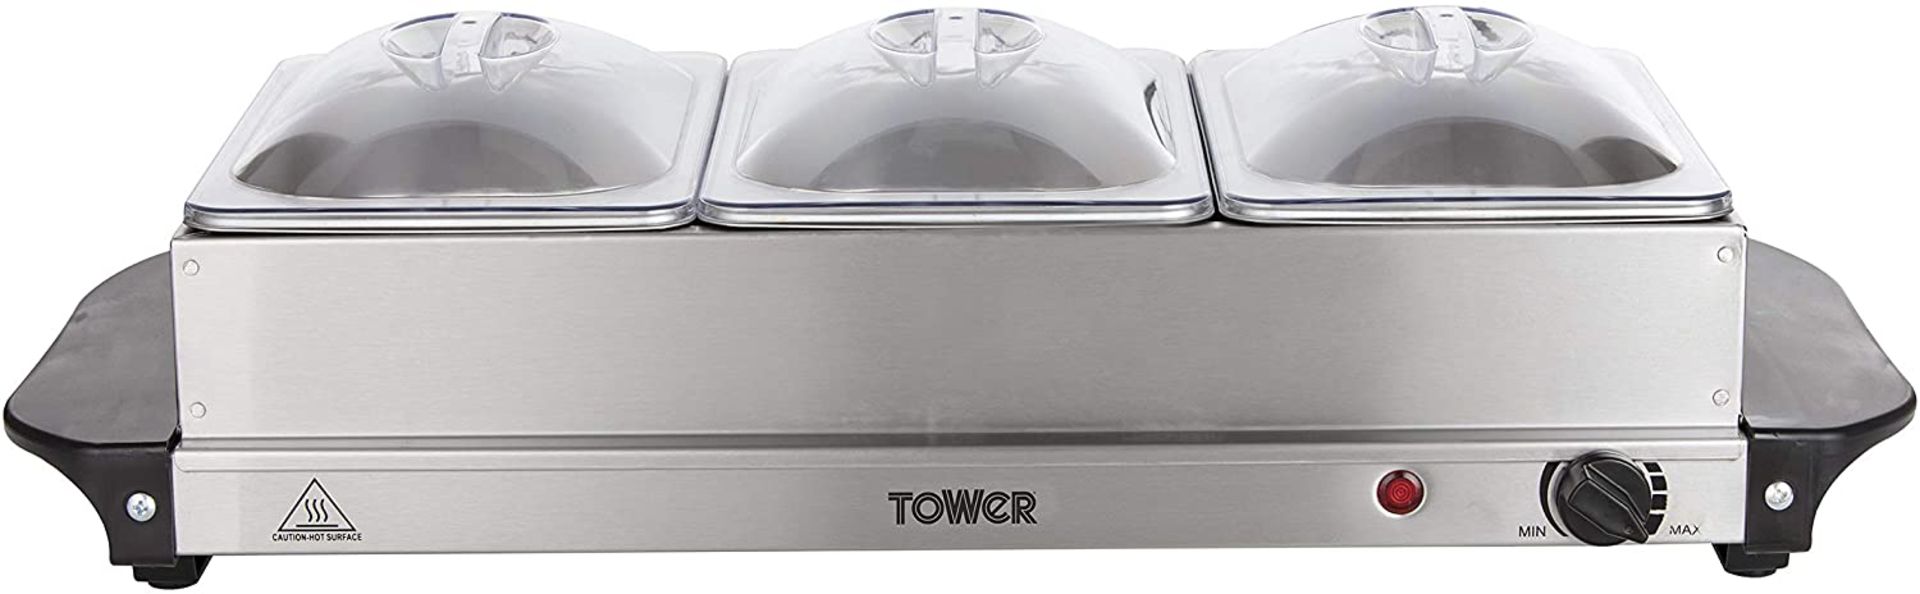 RRP £50 Tower Three Tray Buffet Server and Plate Warmer with Adjustable Temperature Setting, LED Pow